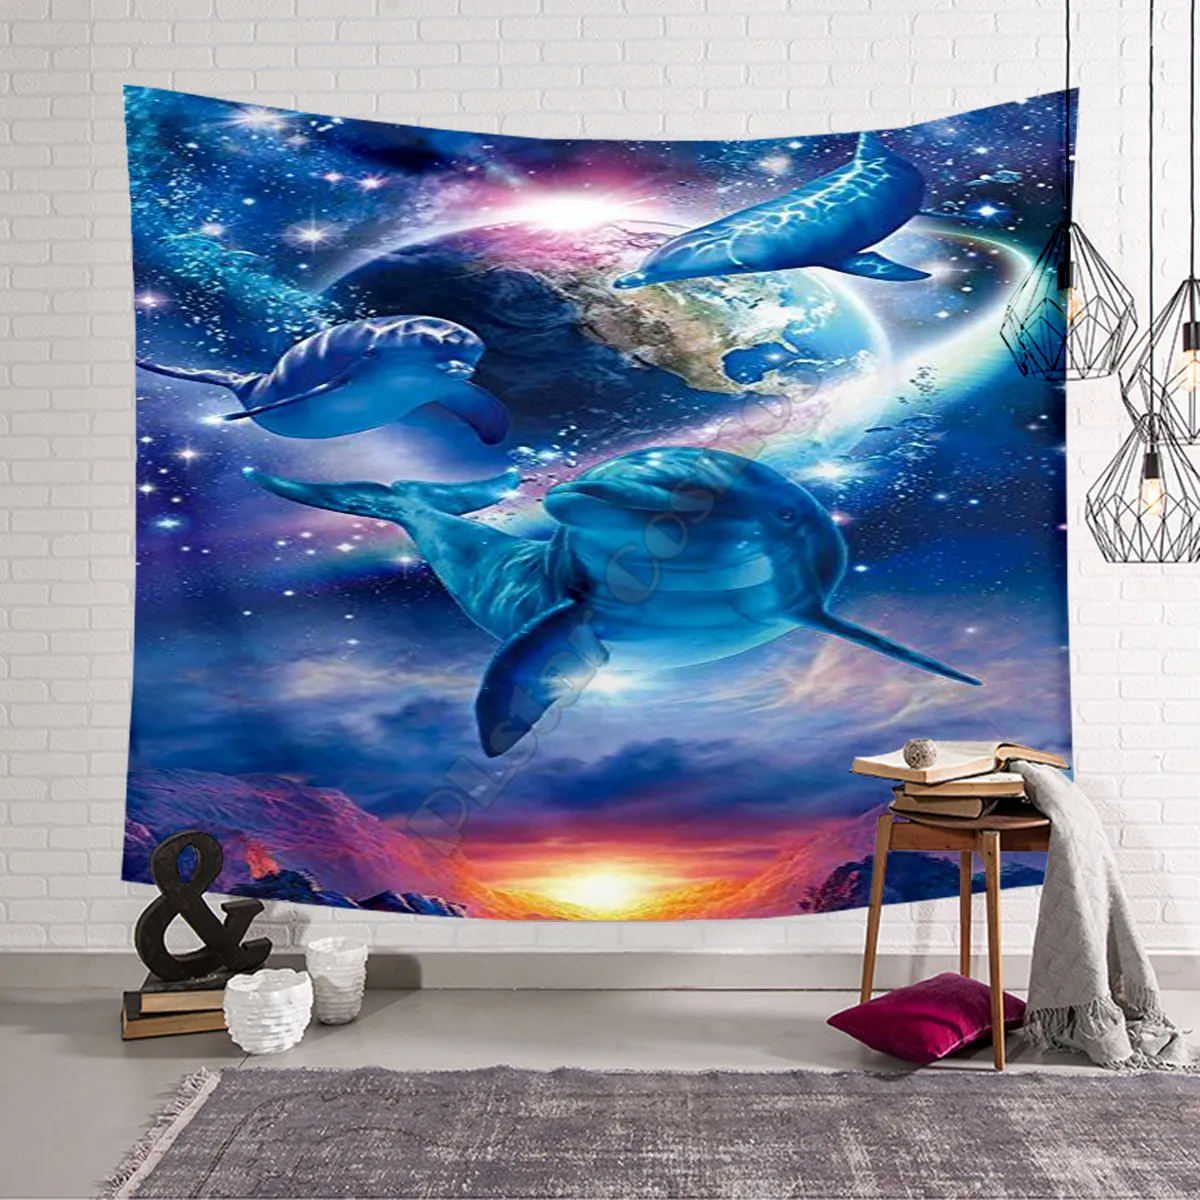 

Dolphin Tapestry 3D All Over Printed Tapestrying Rectangular Home Decor Wall Hanging 02